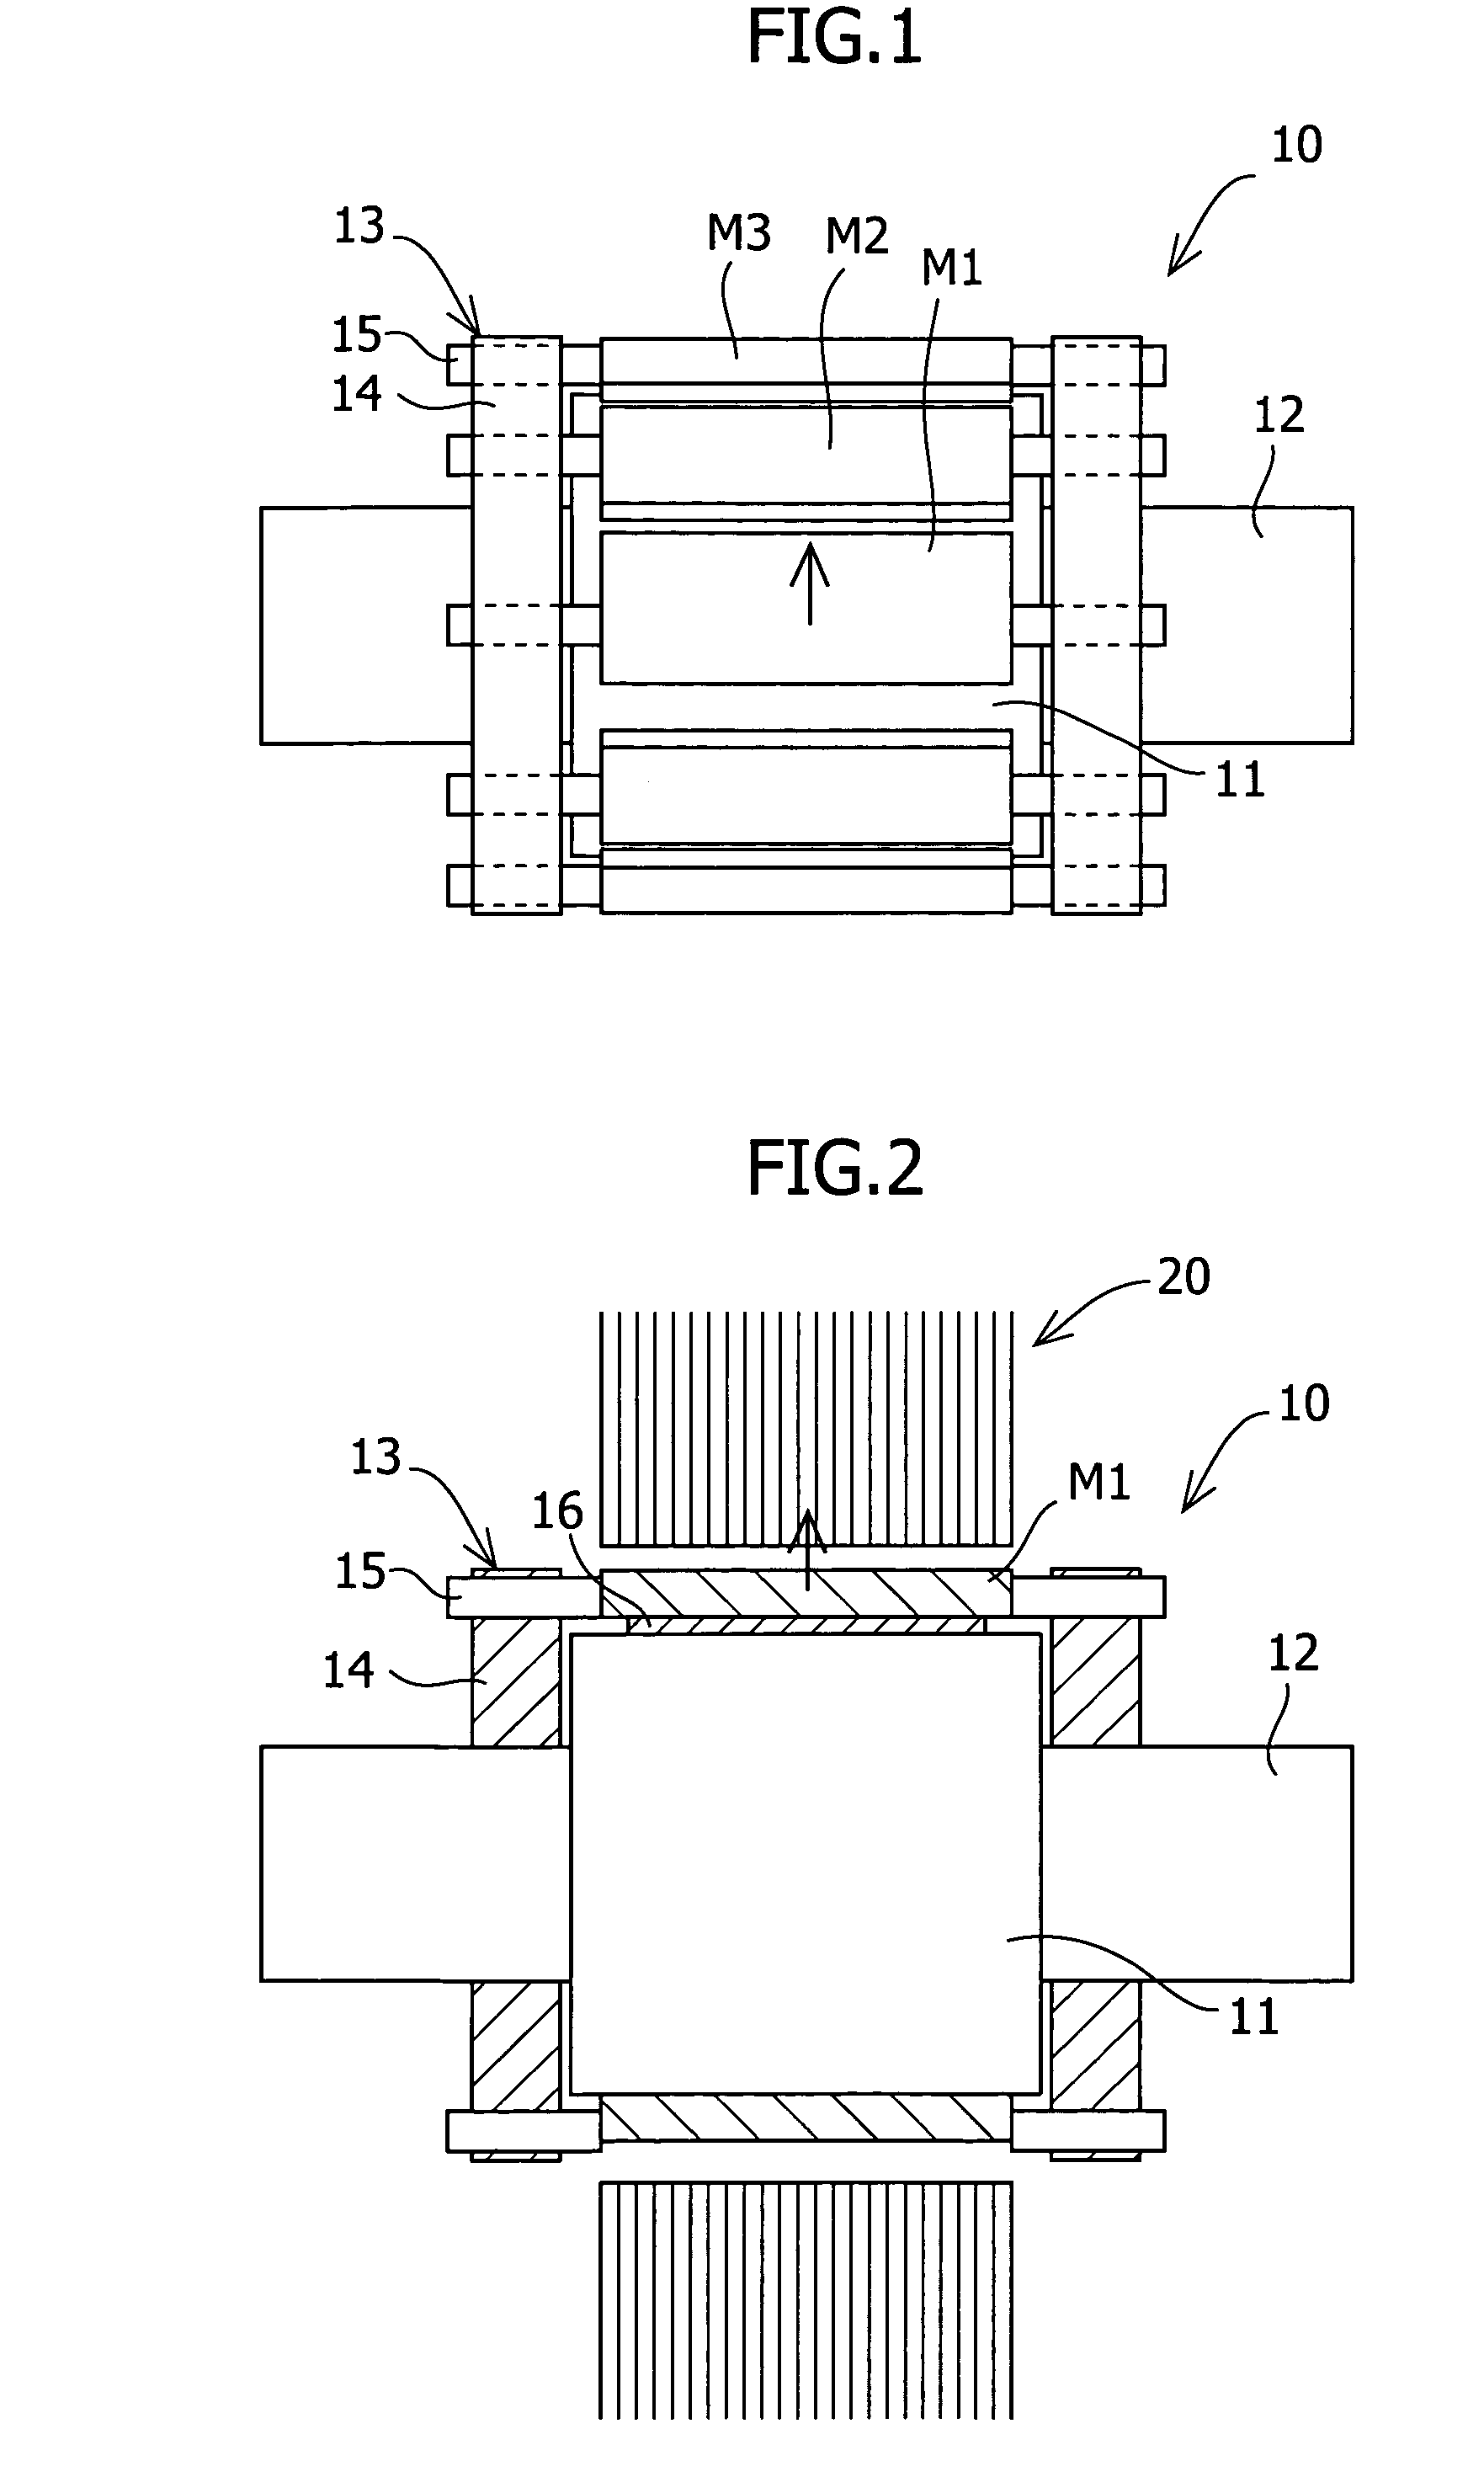 Permanent magnet motor with magnets in an adjusted position to reduce cogging torque